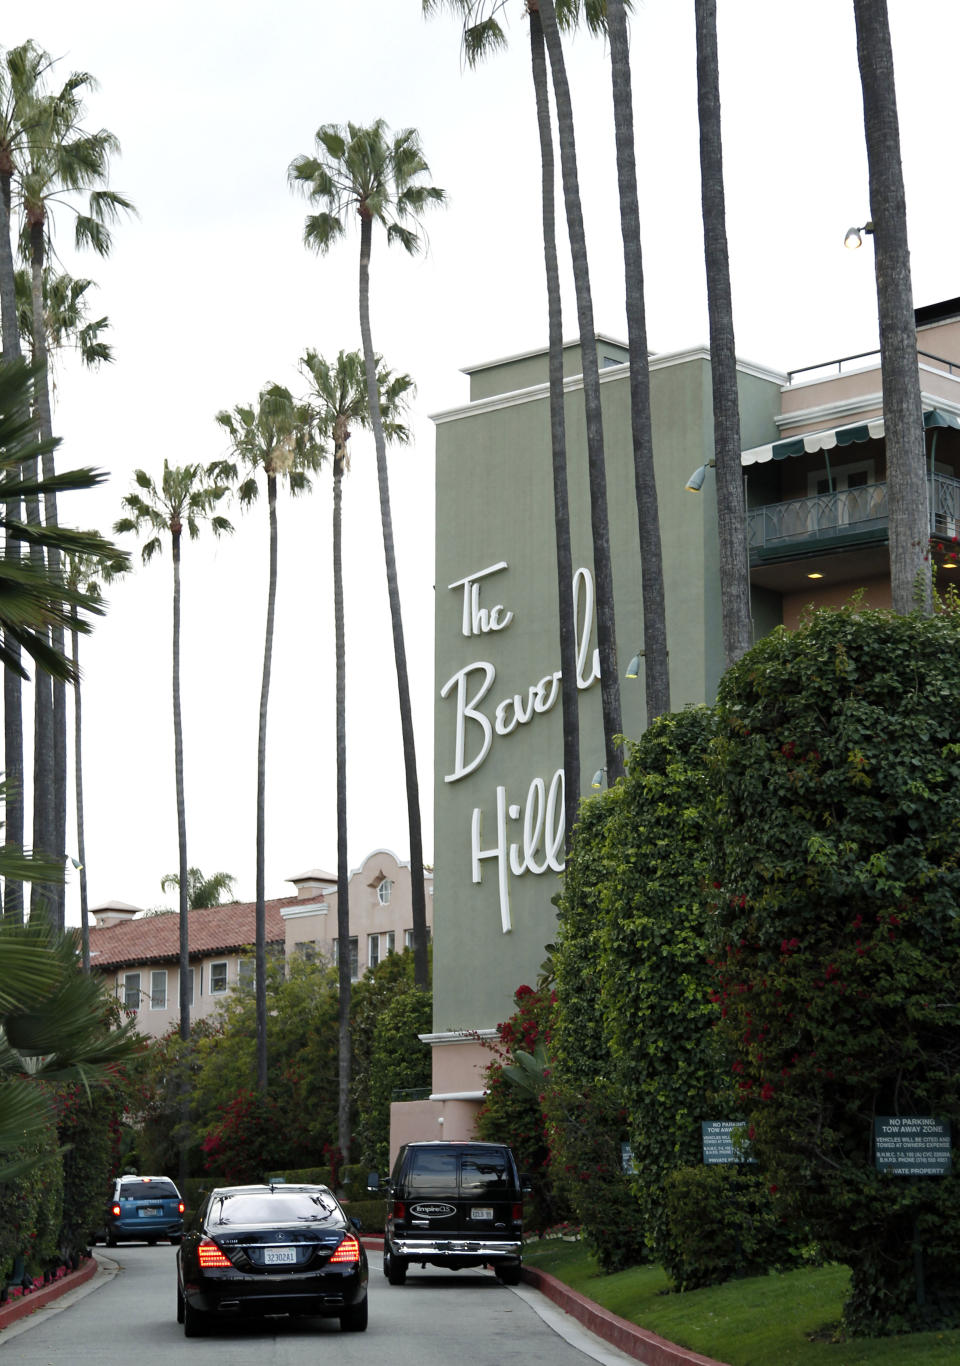 In this April 25, 2012 photo, the entrance to the Beverly Hills Hotel is seen in Beverly Hills, Calif. The Beverly Hills Hotel is celebrating its 100th anniversary this year. (AP Photo/Matt Sayles)